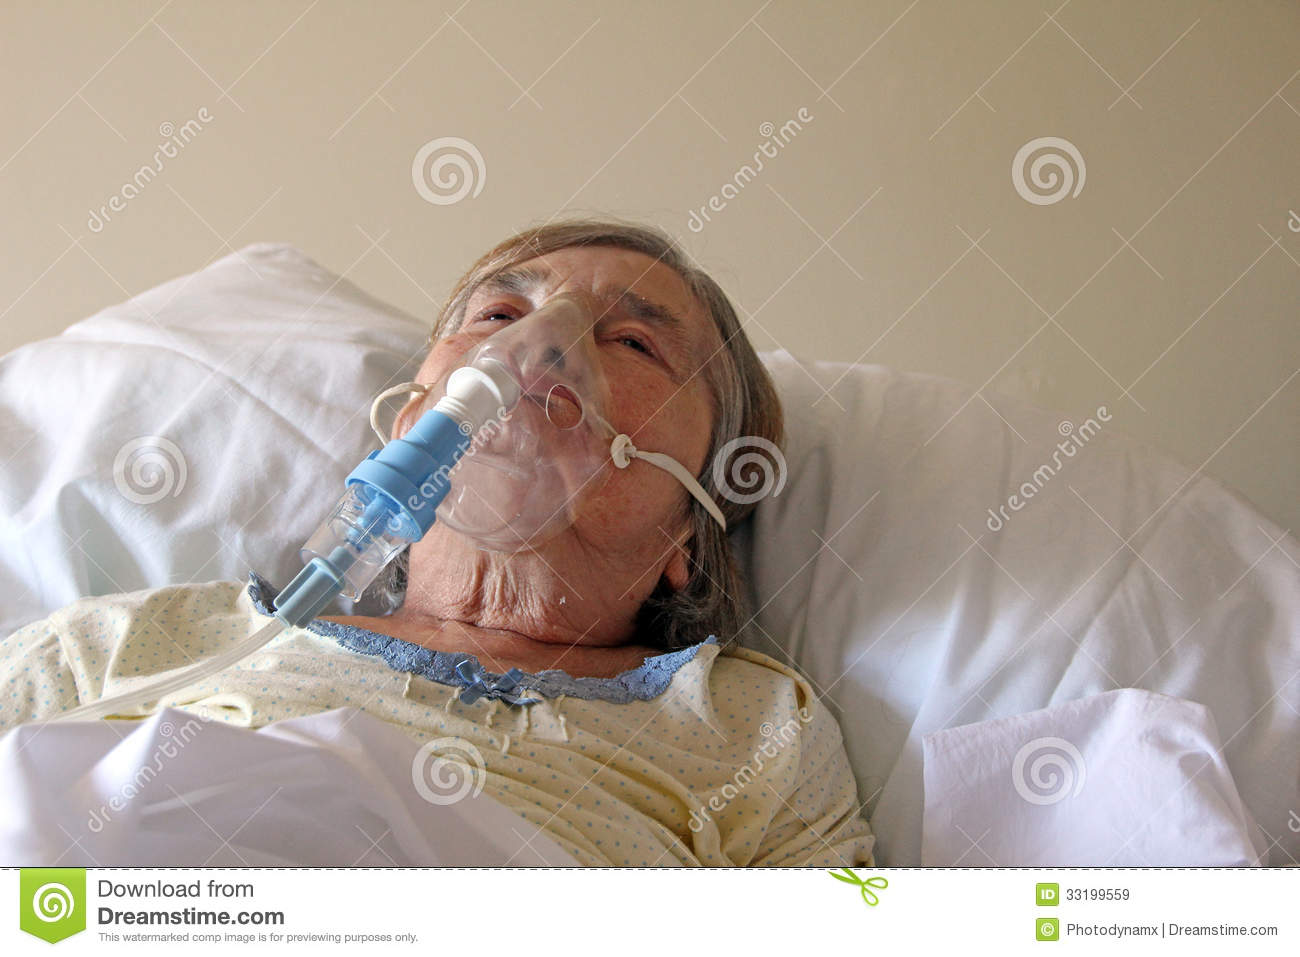 Patient With Oxygen Mask Royalty Free Stock Images   Image  33199559